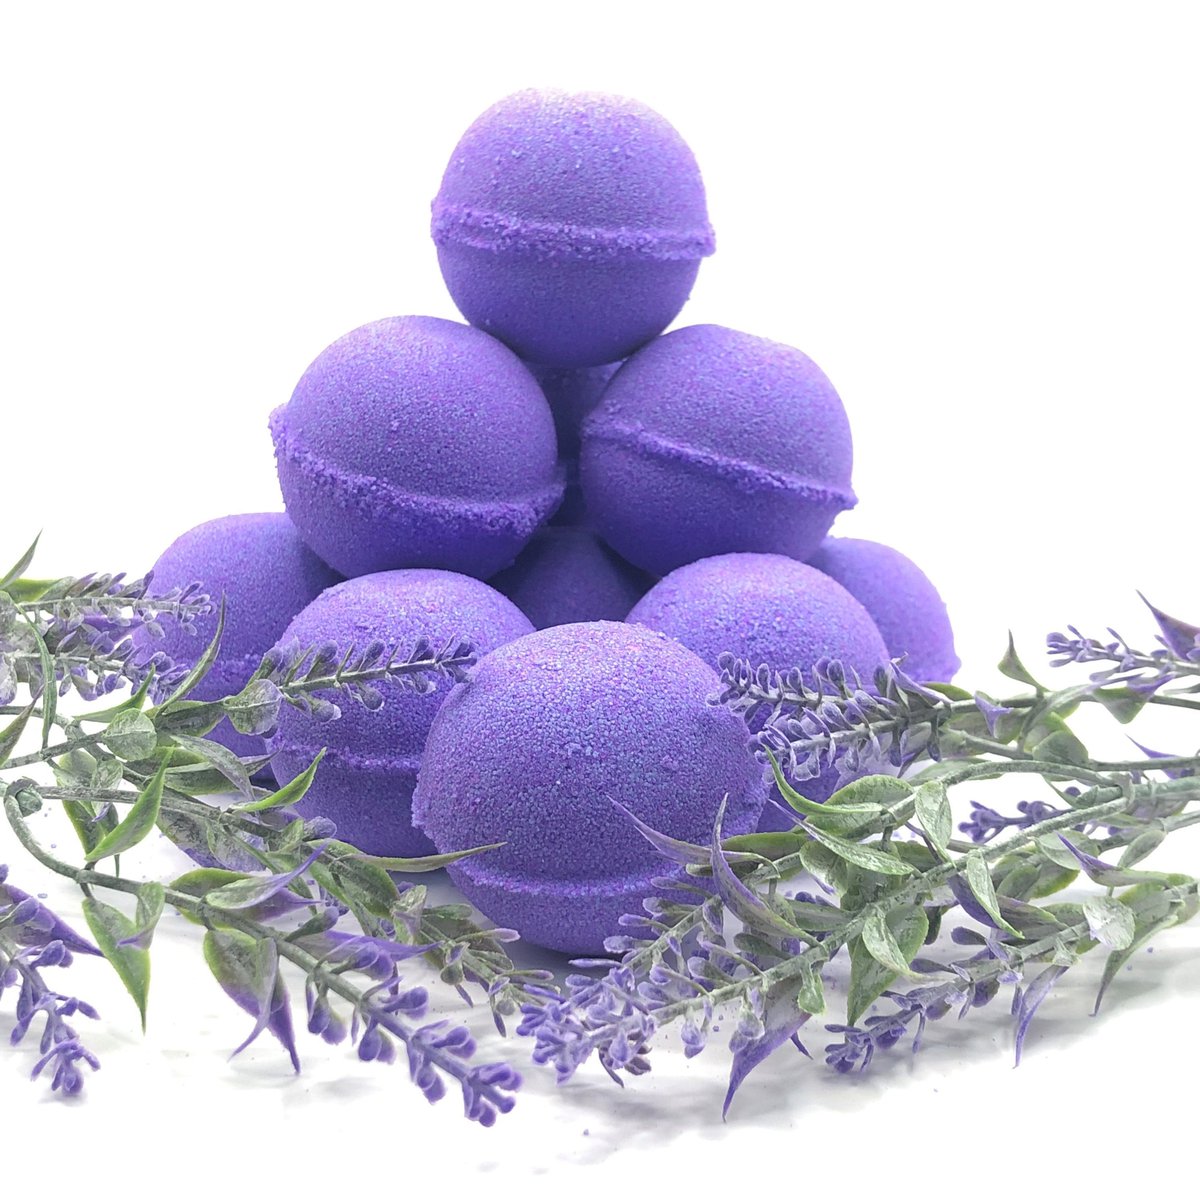 Thanks for the great review Linda H. ★★★★★! etsy.me/3uhy2ou #etsy #purple #bridalshower #minibathbombs #bathbombsforgirls #samplefizzybombs #lavenderbathbombs #organic #natural #soothing